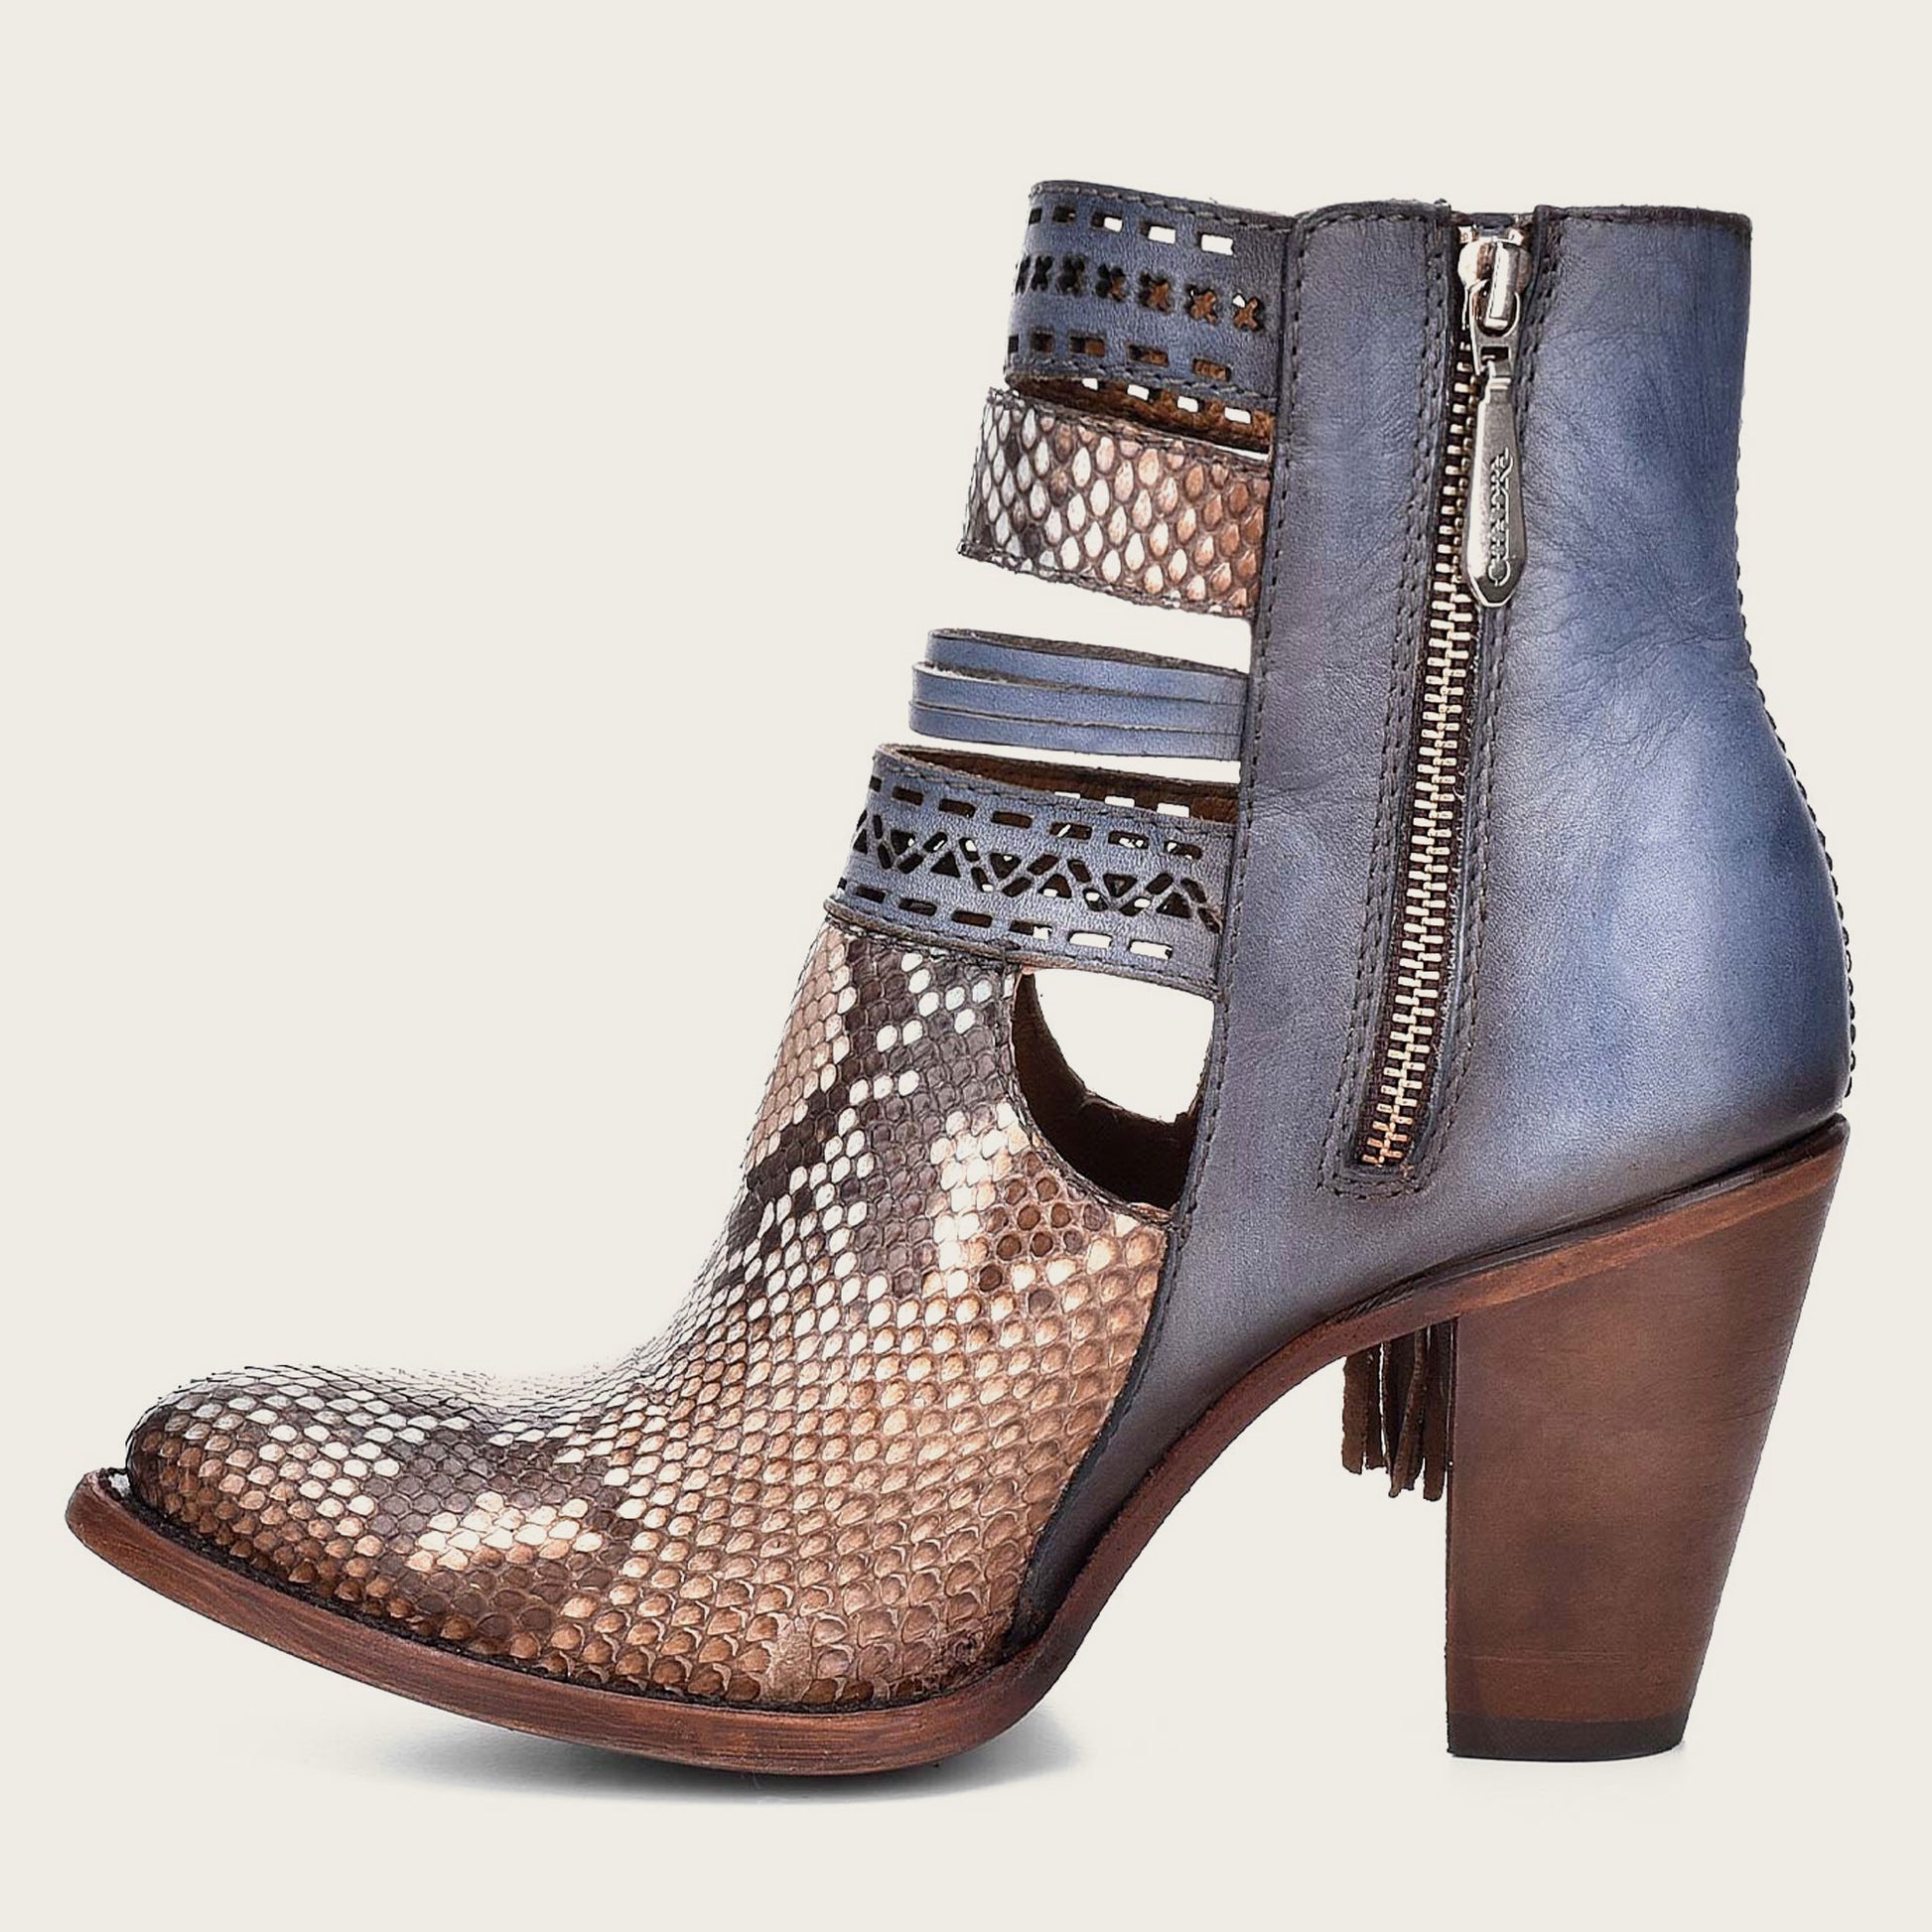 Blue python leather bootie with sleek design and pointed toe.